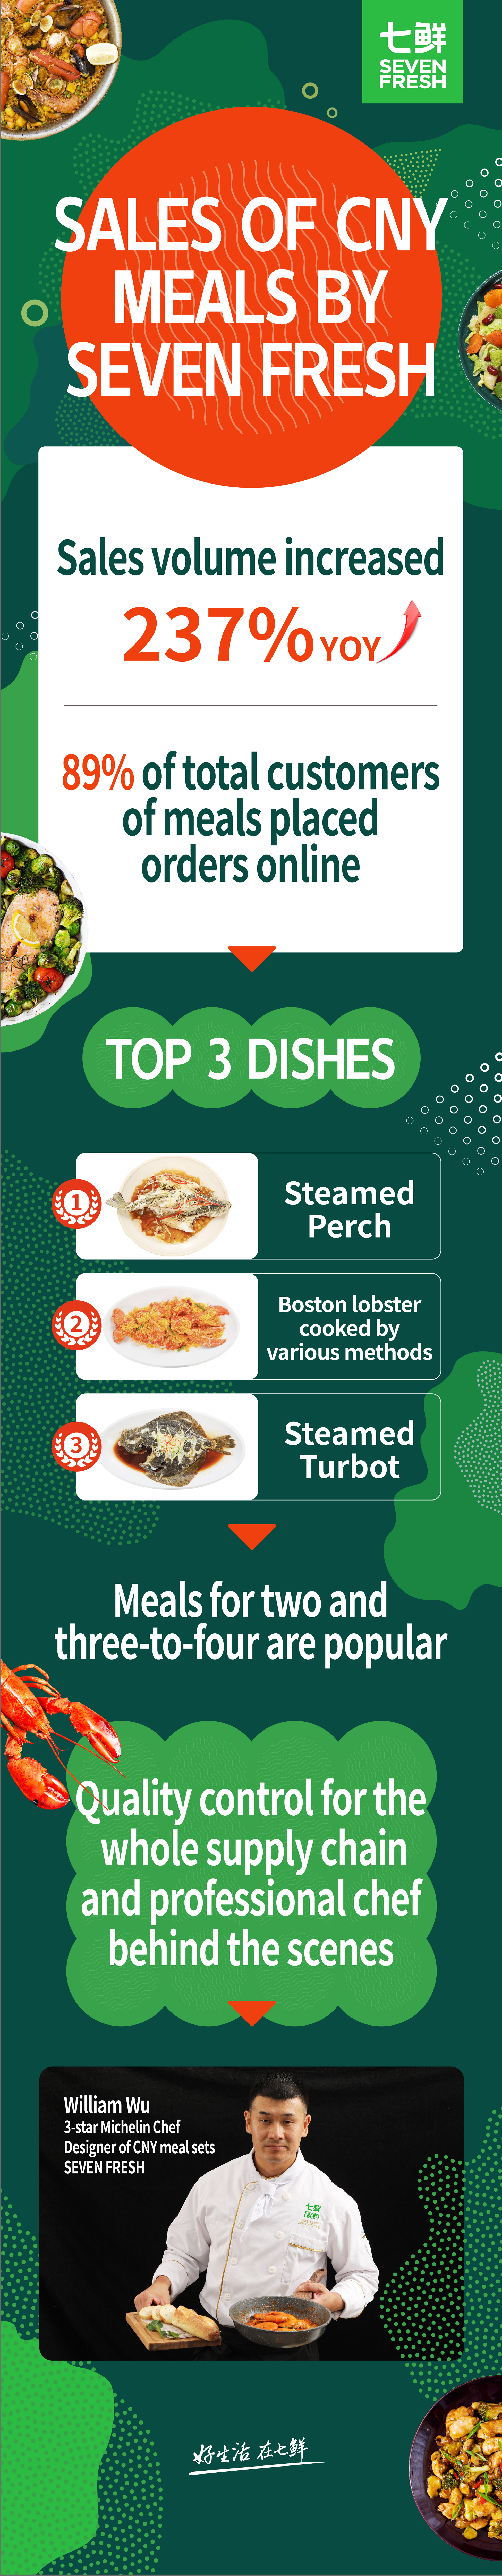 Items high in demand include ready-to-cook meal gift boxes and meal packages, which include Boston lobsters, steamed fish, as well as cooked crabs.